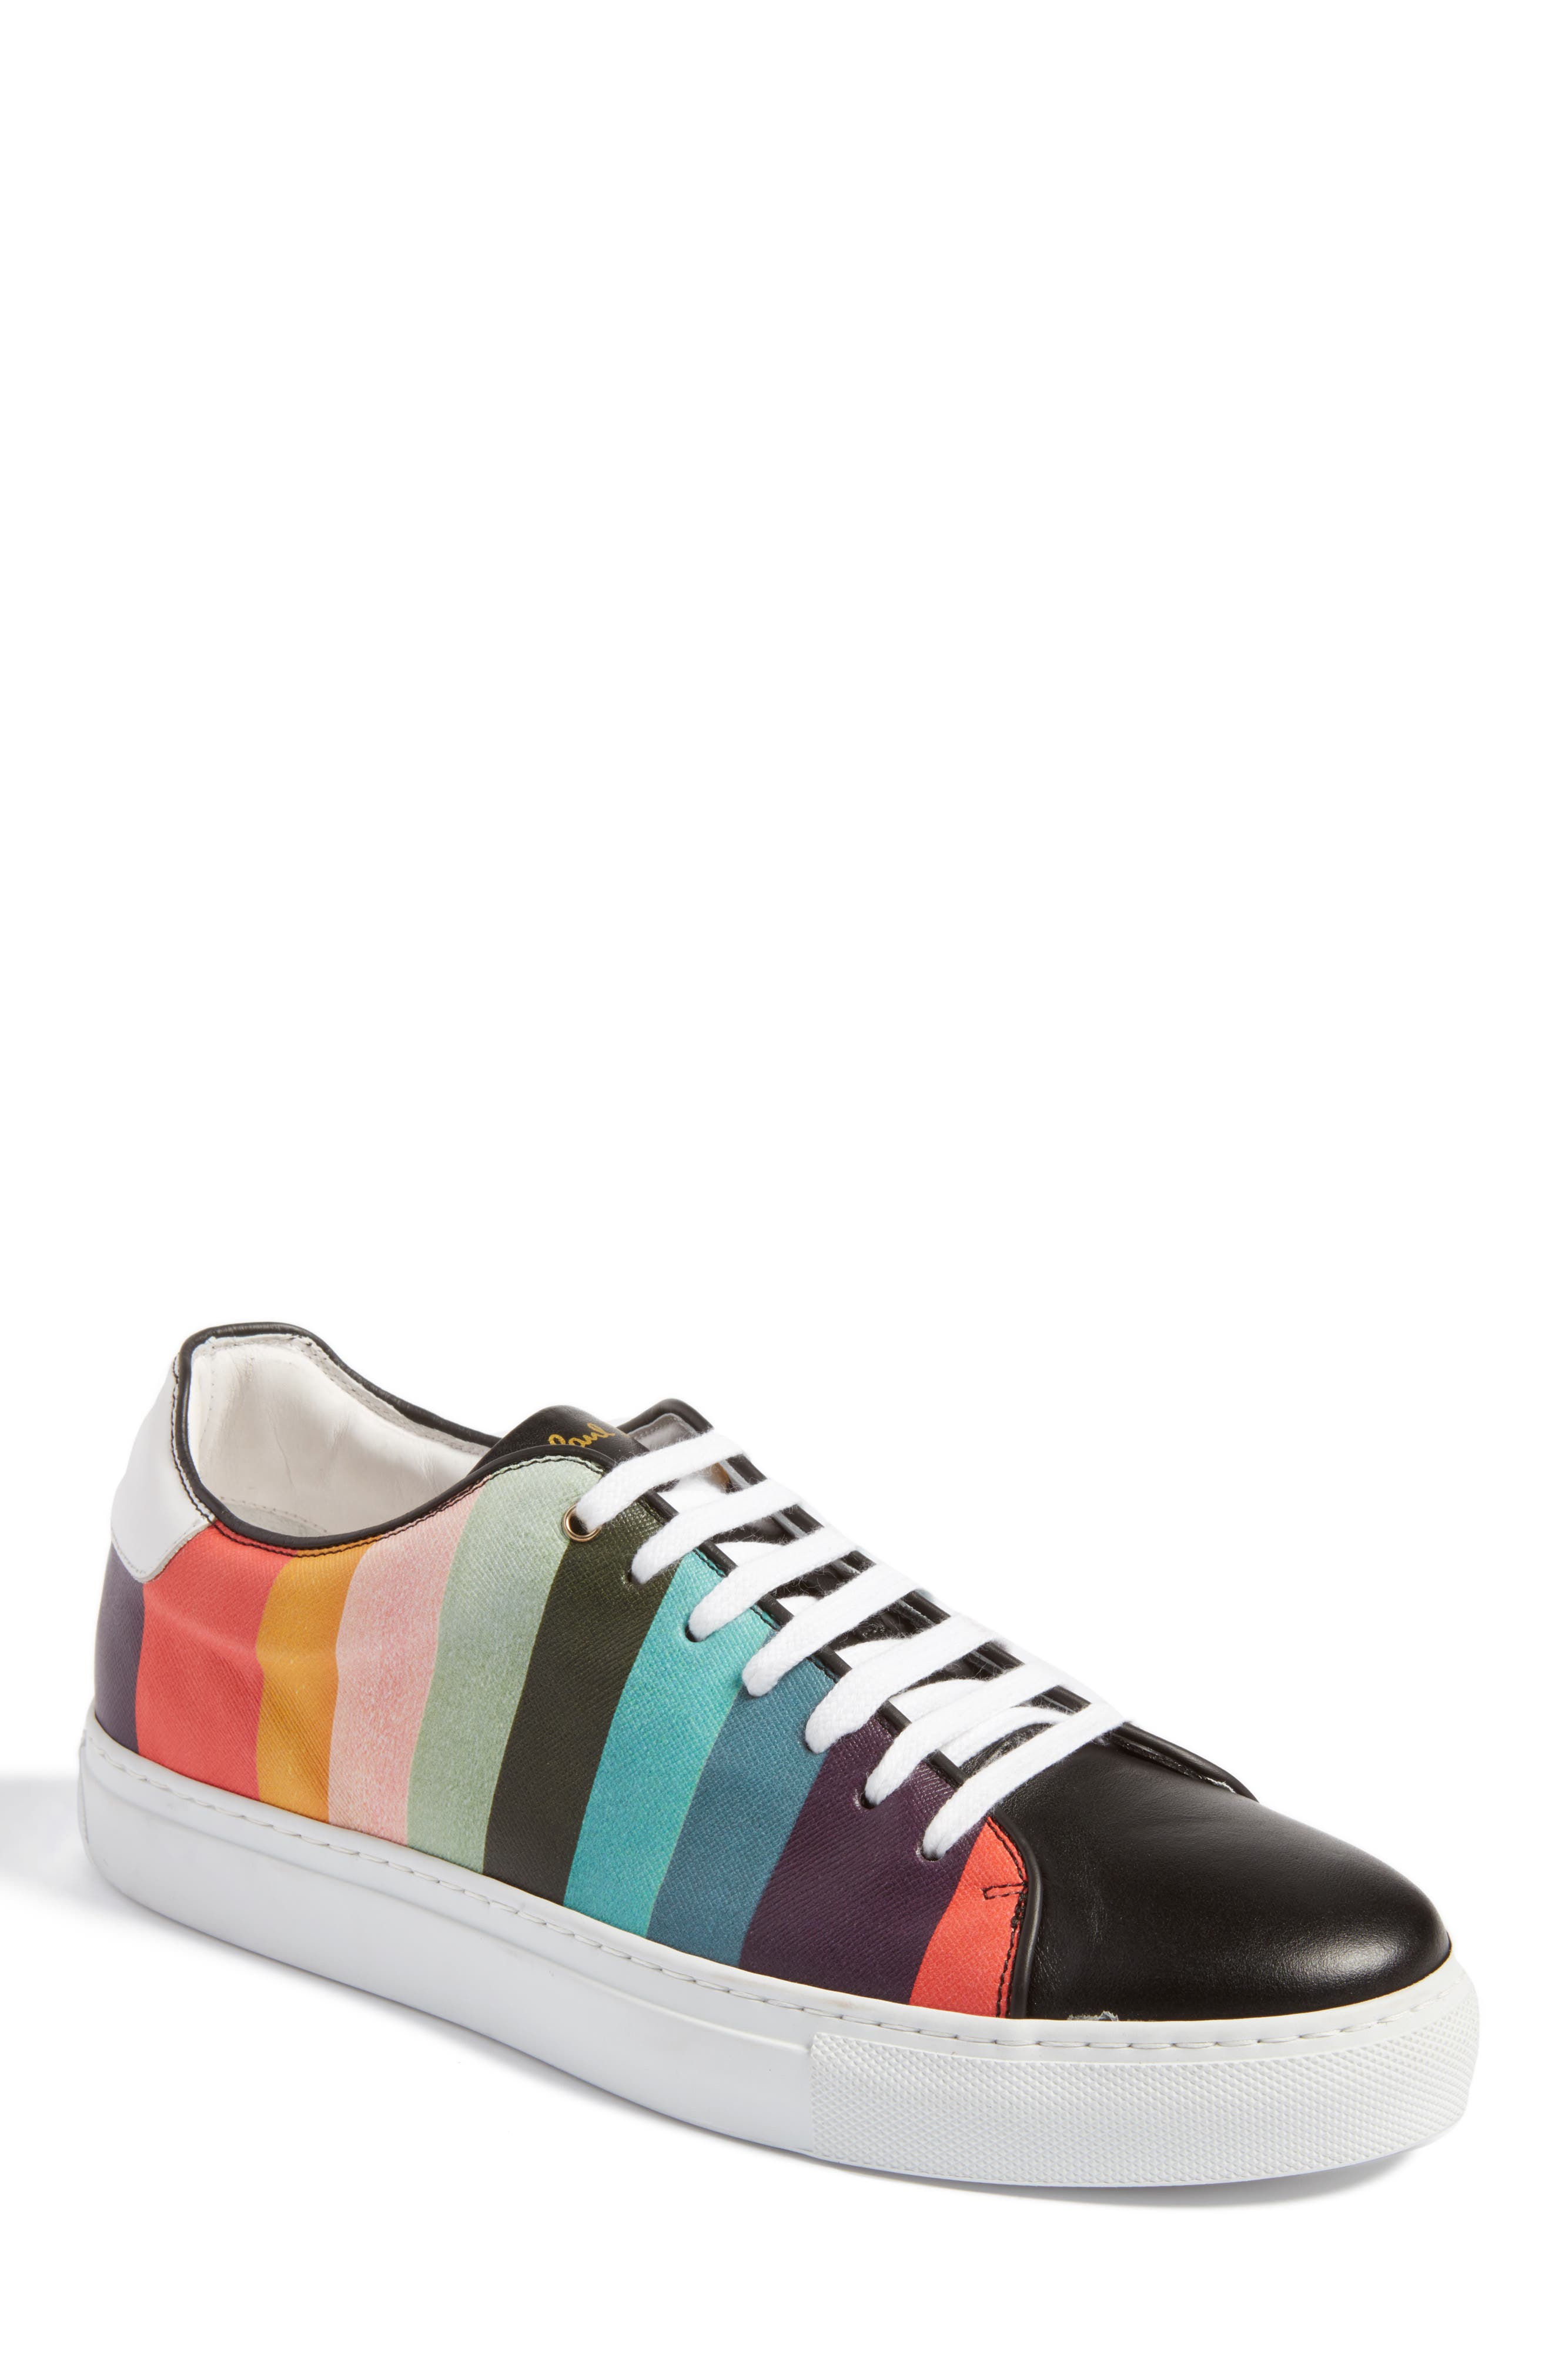 paul smith shoes nordstrom